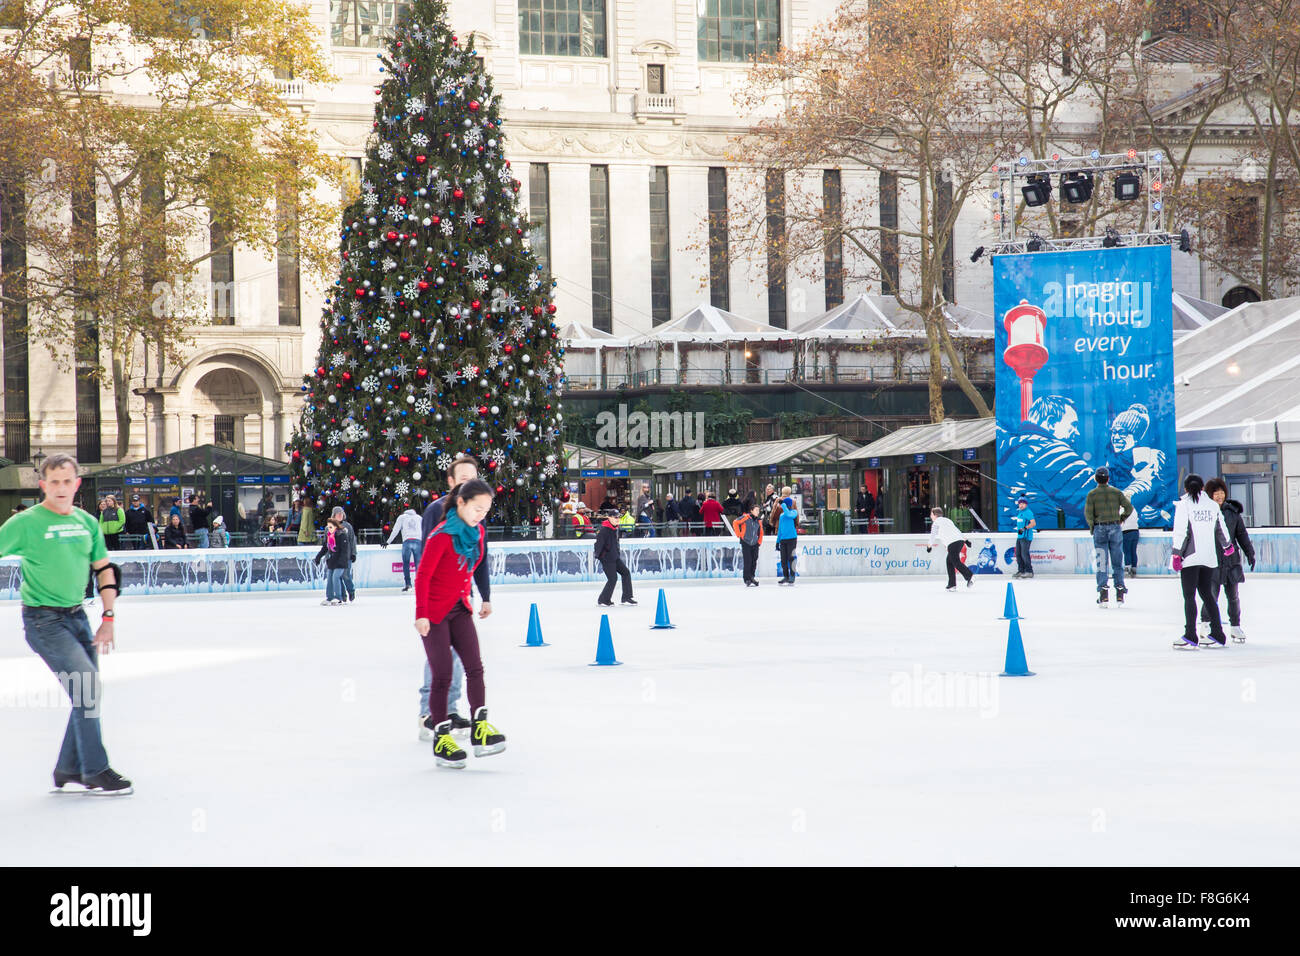 View of Citi Pond ice skating rink at Bryant Park in Manhattan with Christmas Tree on display Stock Photo